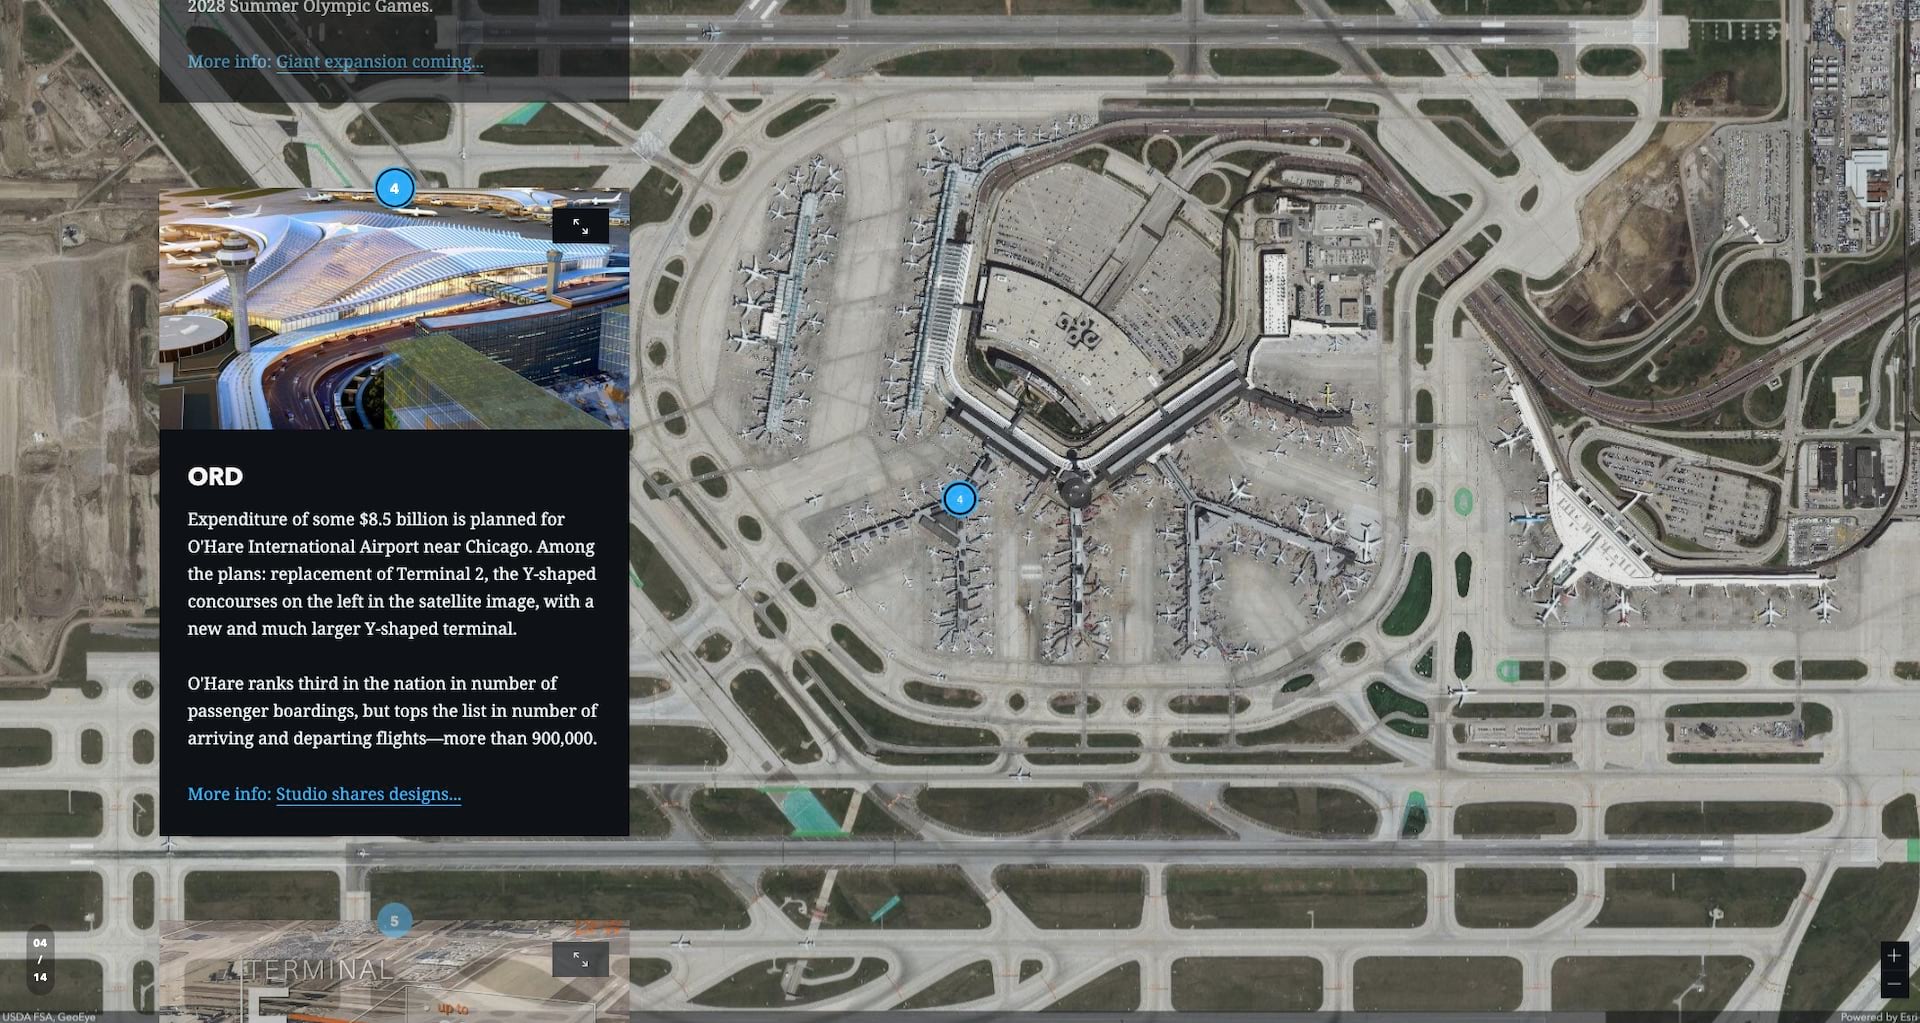 A tour stop in the Expanding Airports story